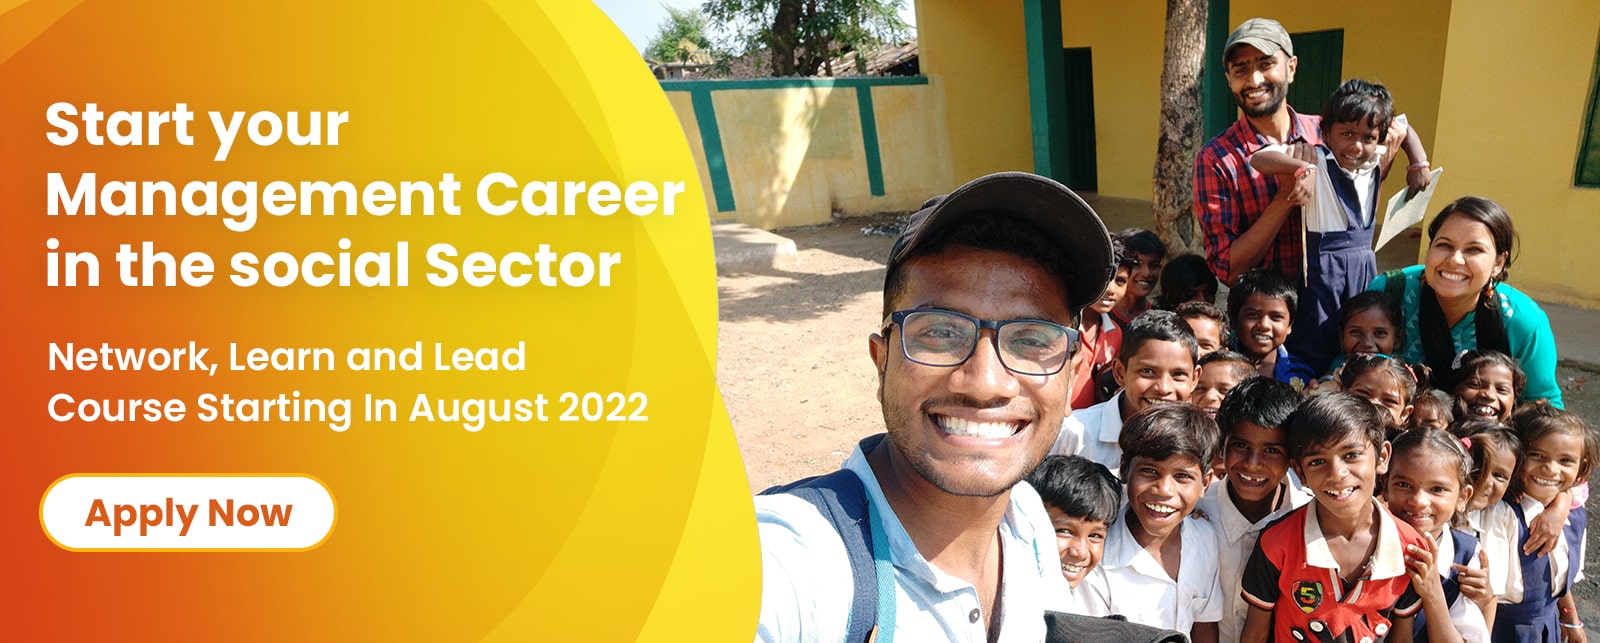 Start Your Management career in the social Sector